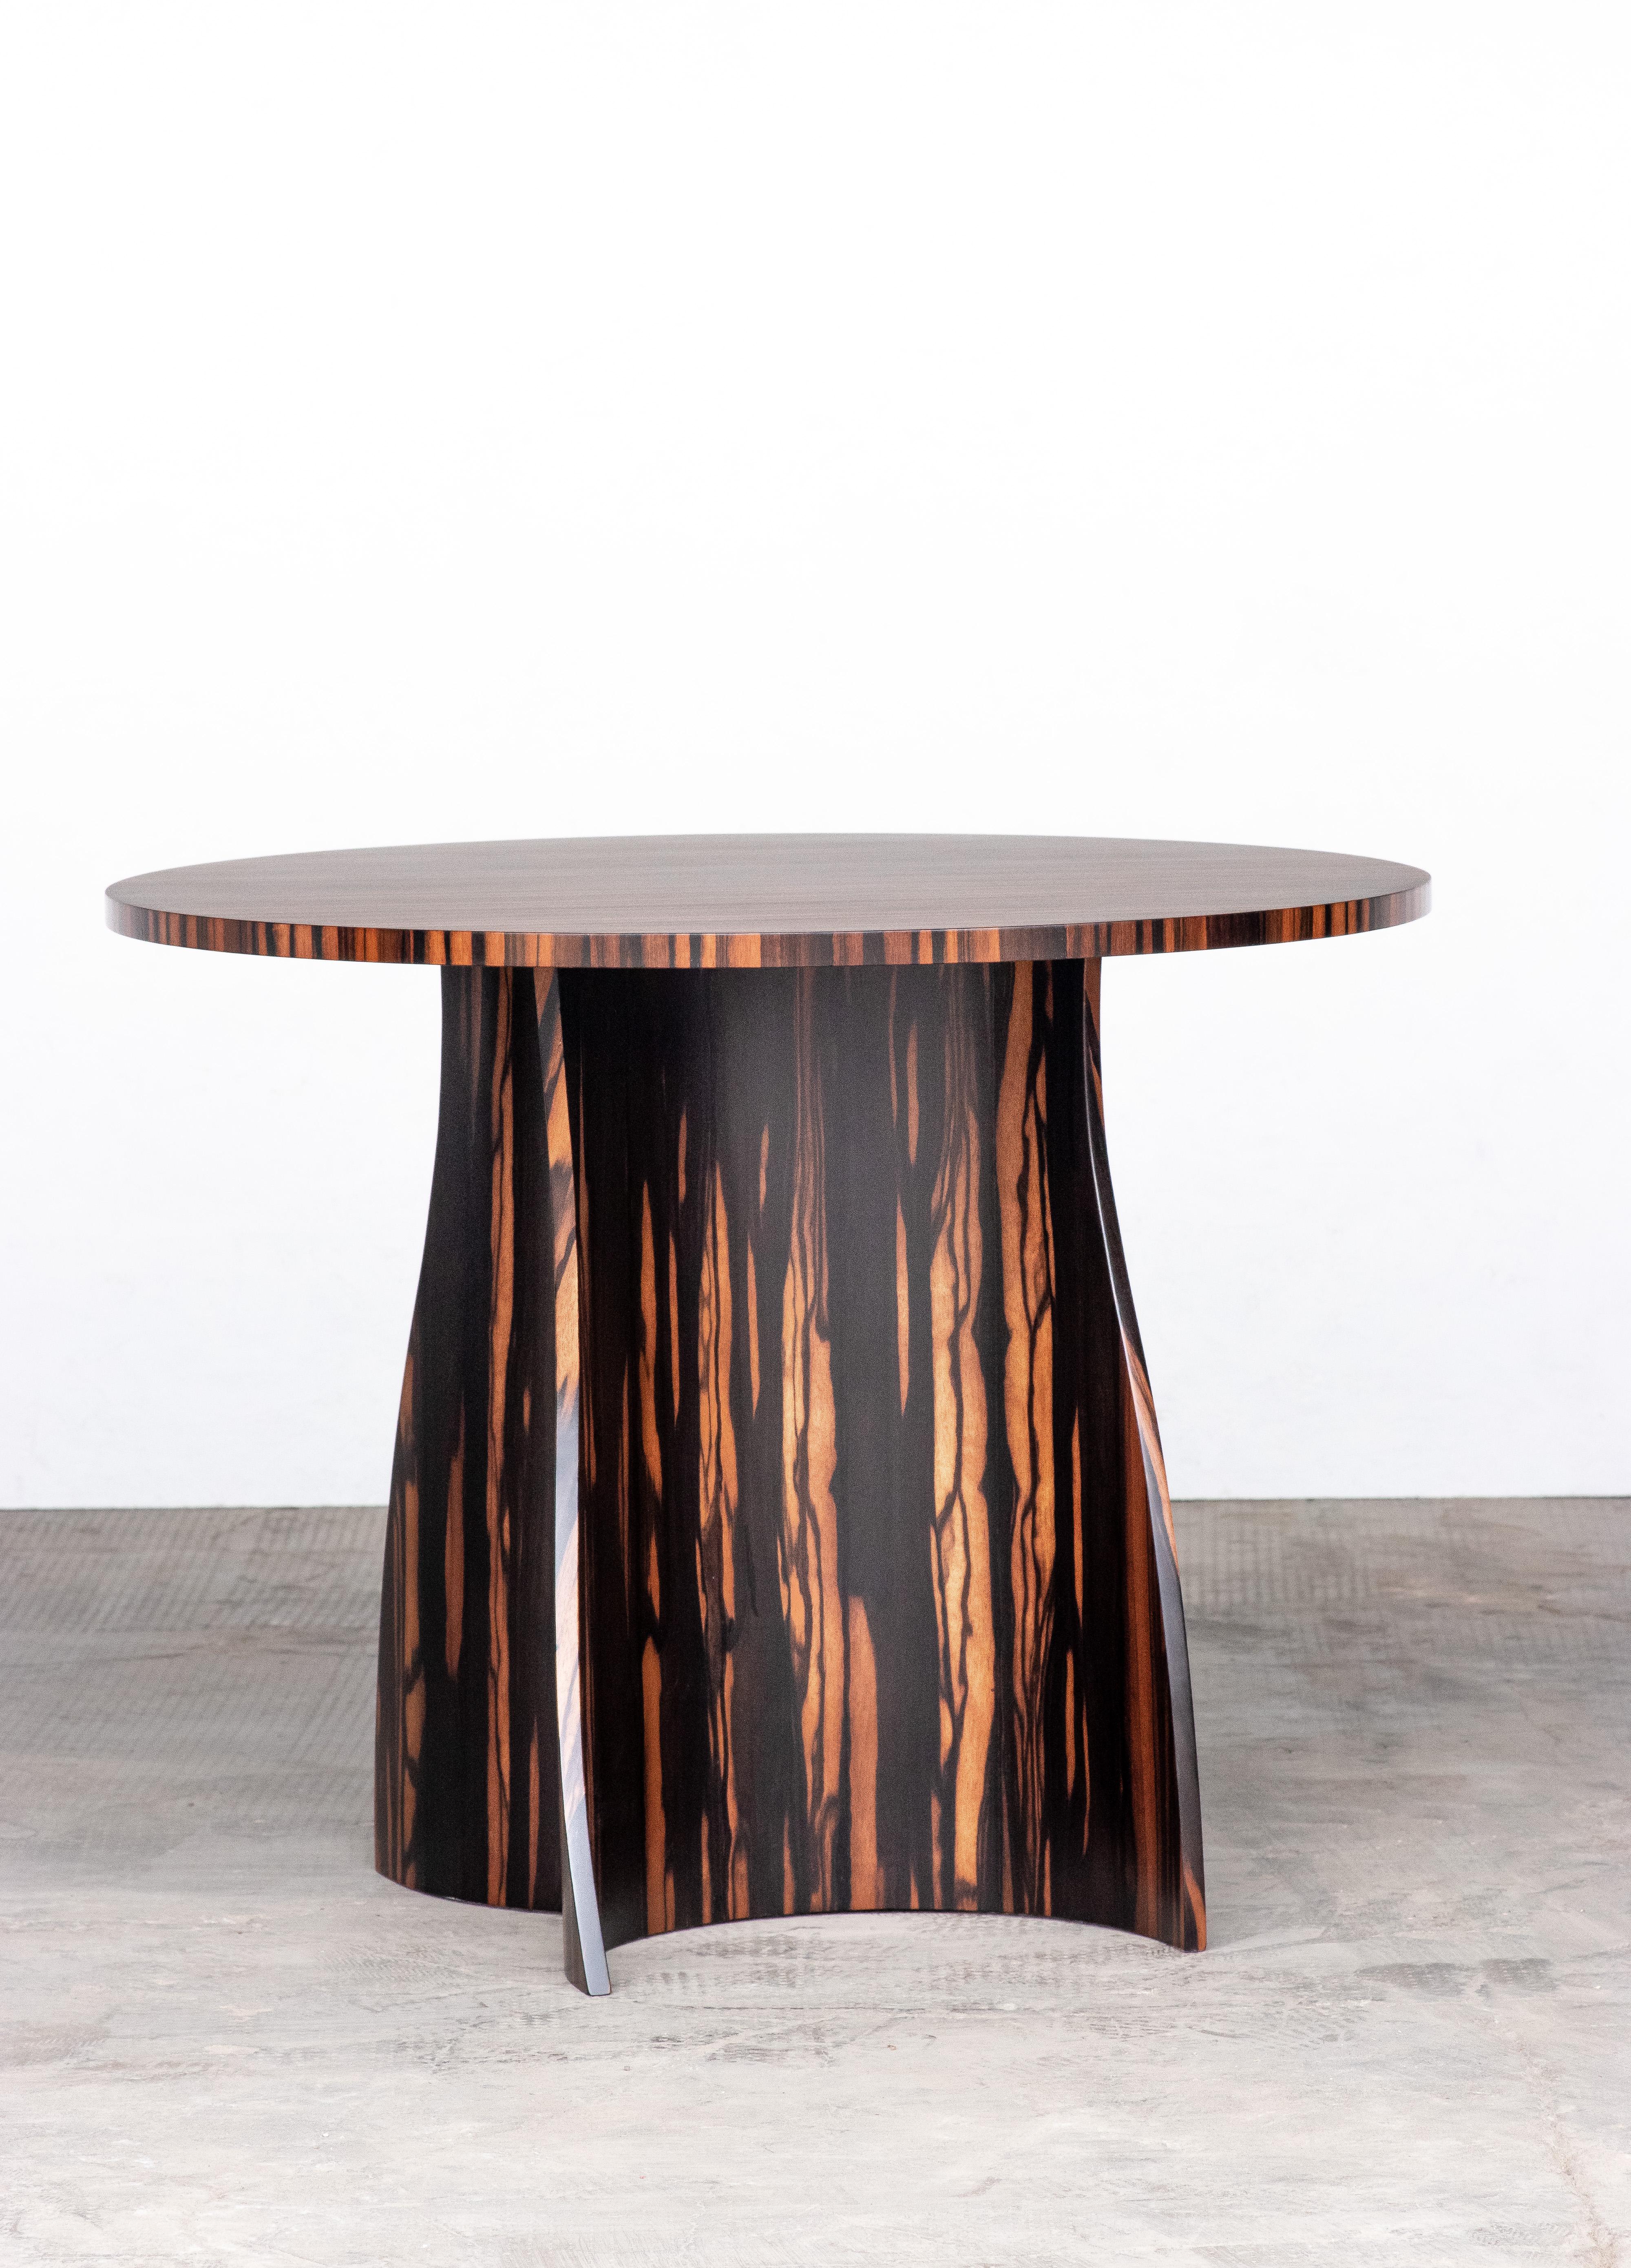 Woodwork Modern Round Side Table in Macassar Ebony from Costantini, Andino - In Stock  For Sale